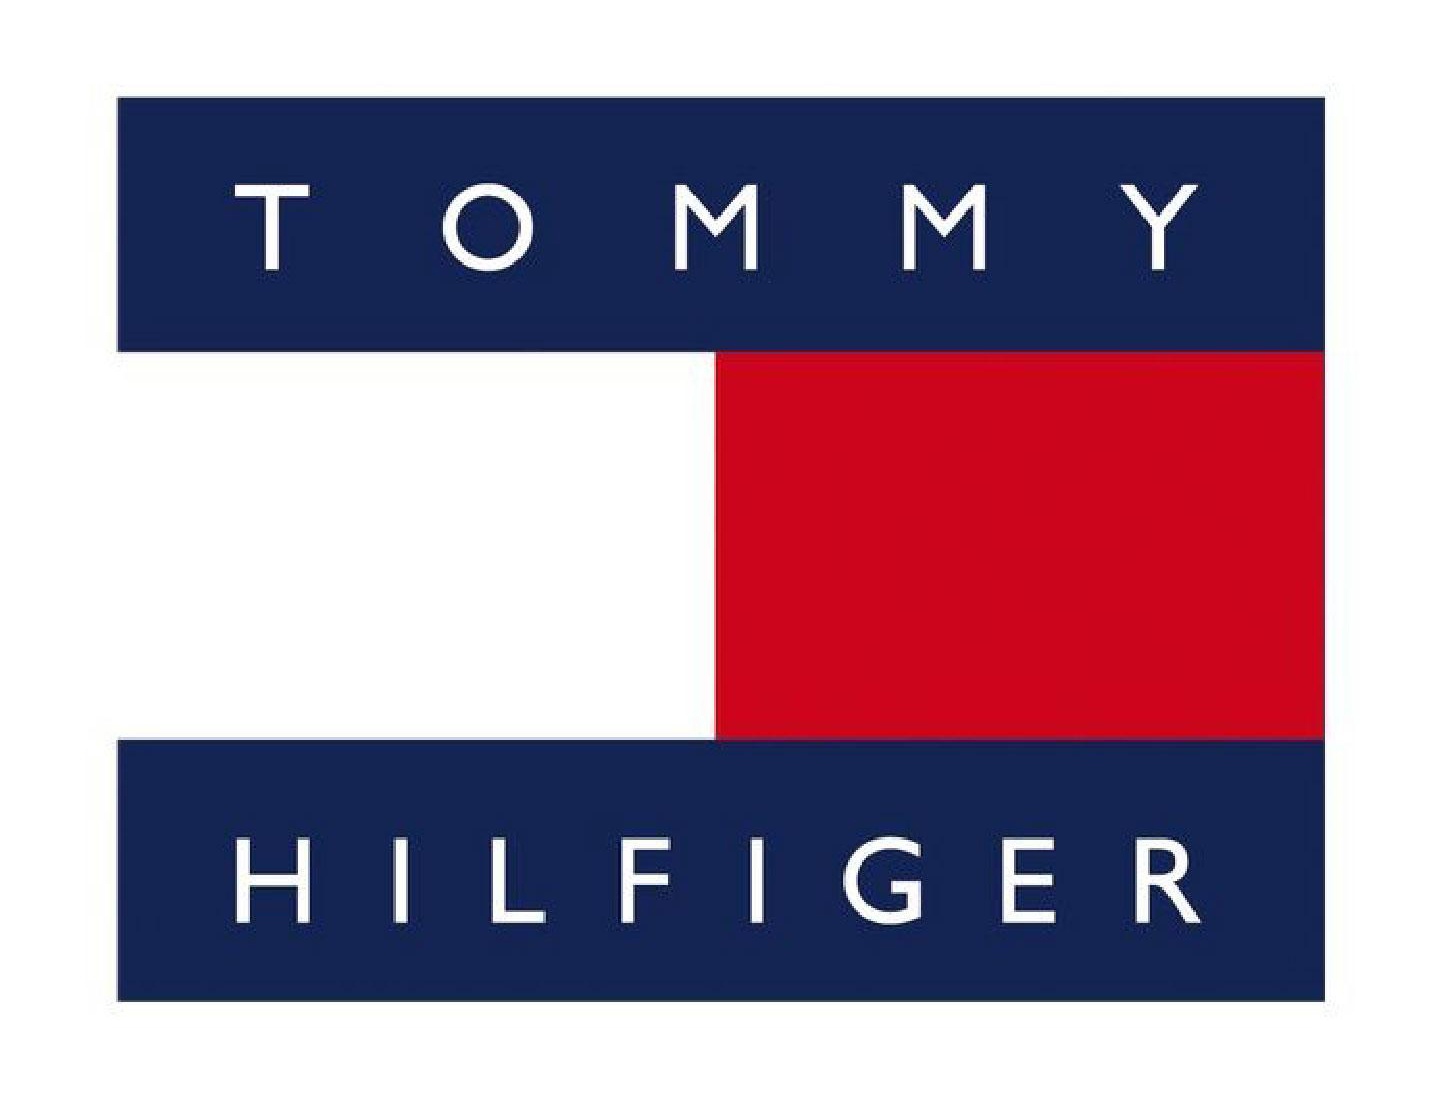 Buy Original Tommy hilfiger Products At Best Price in Tanzania